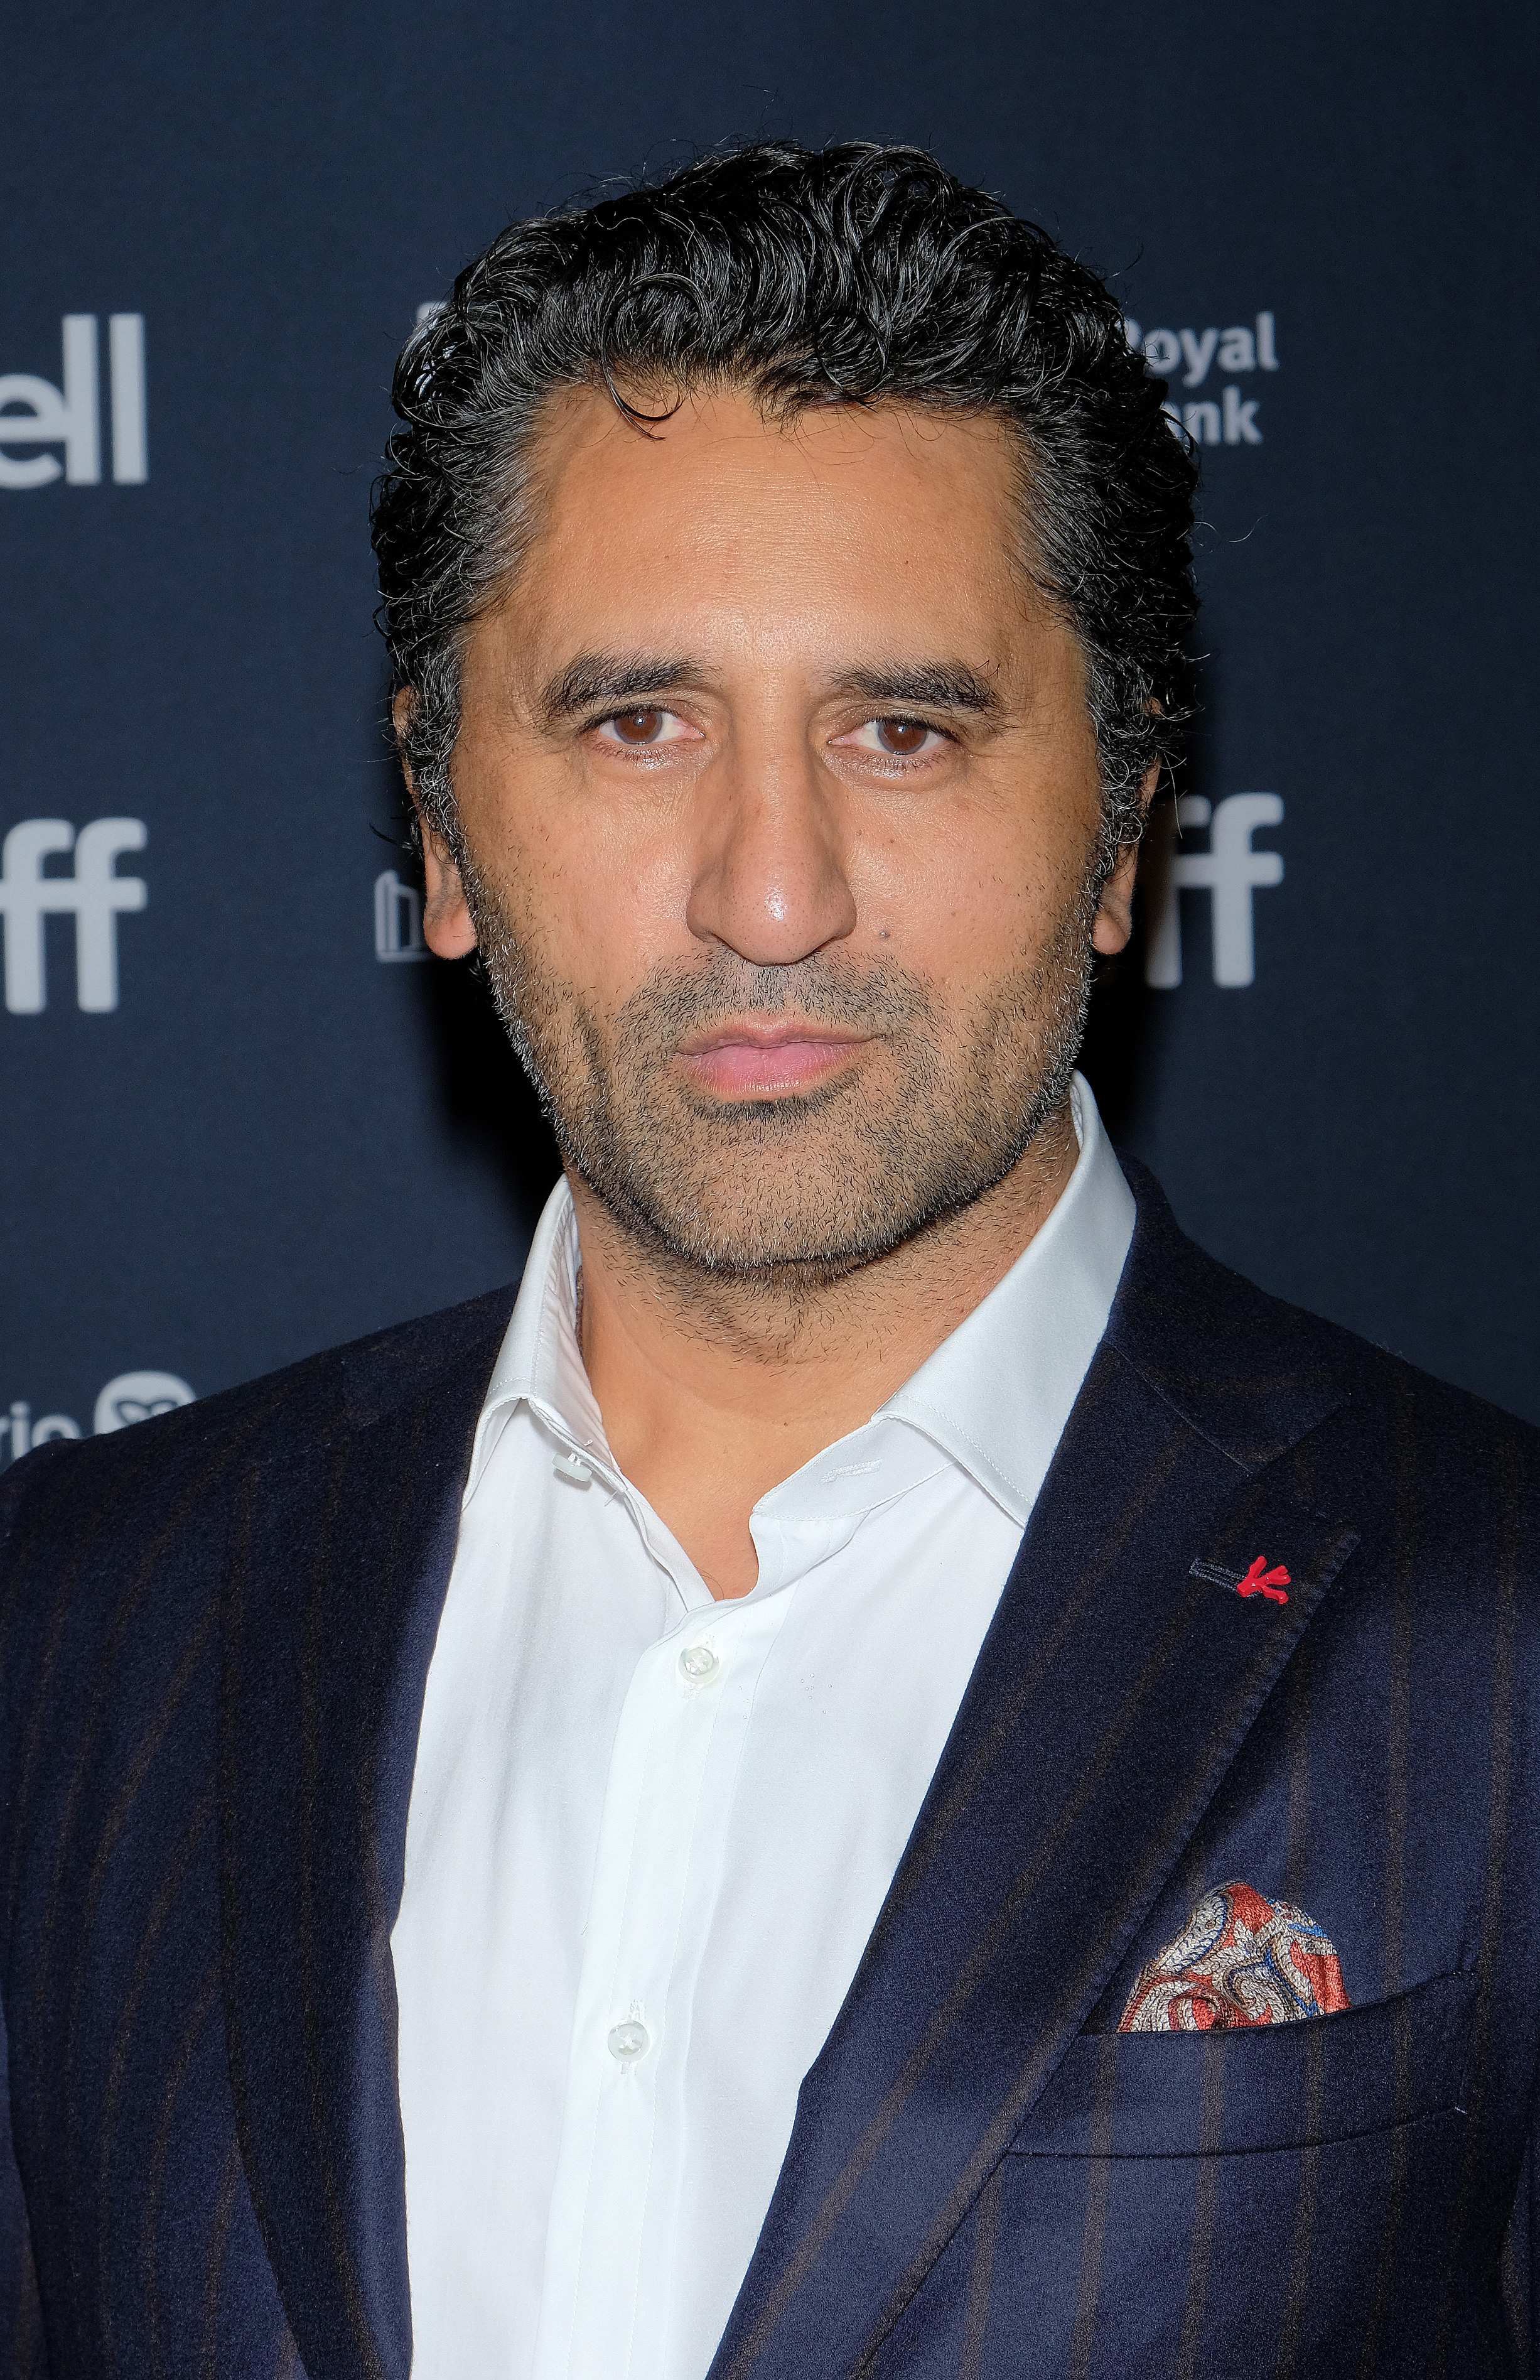 Cliff Curtis at the "Muru" Premiere during the 2022 Toronto International Film Festival on September 10, 2022, in Toronto, Ontario. | Source: Getty Images